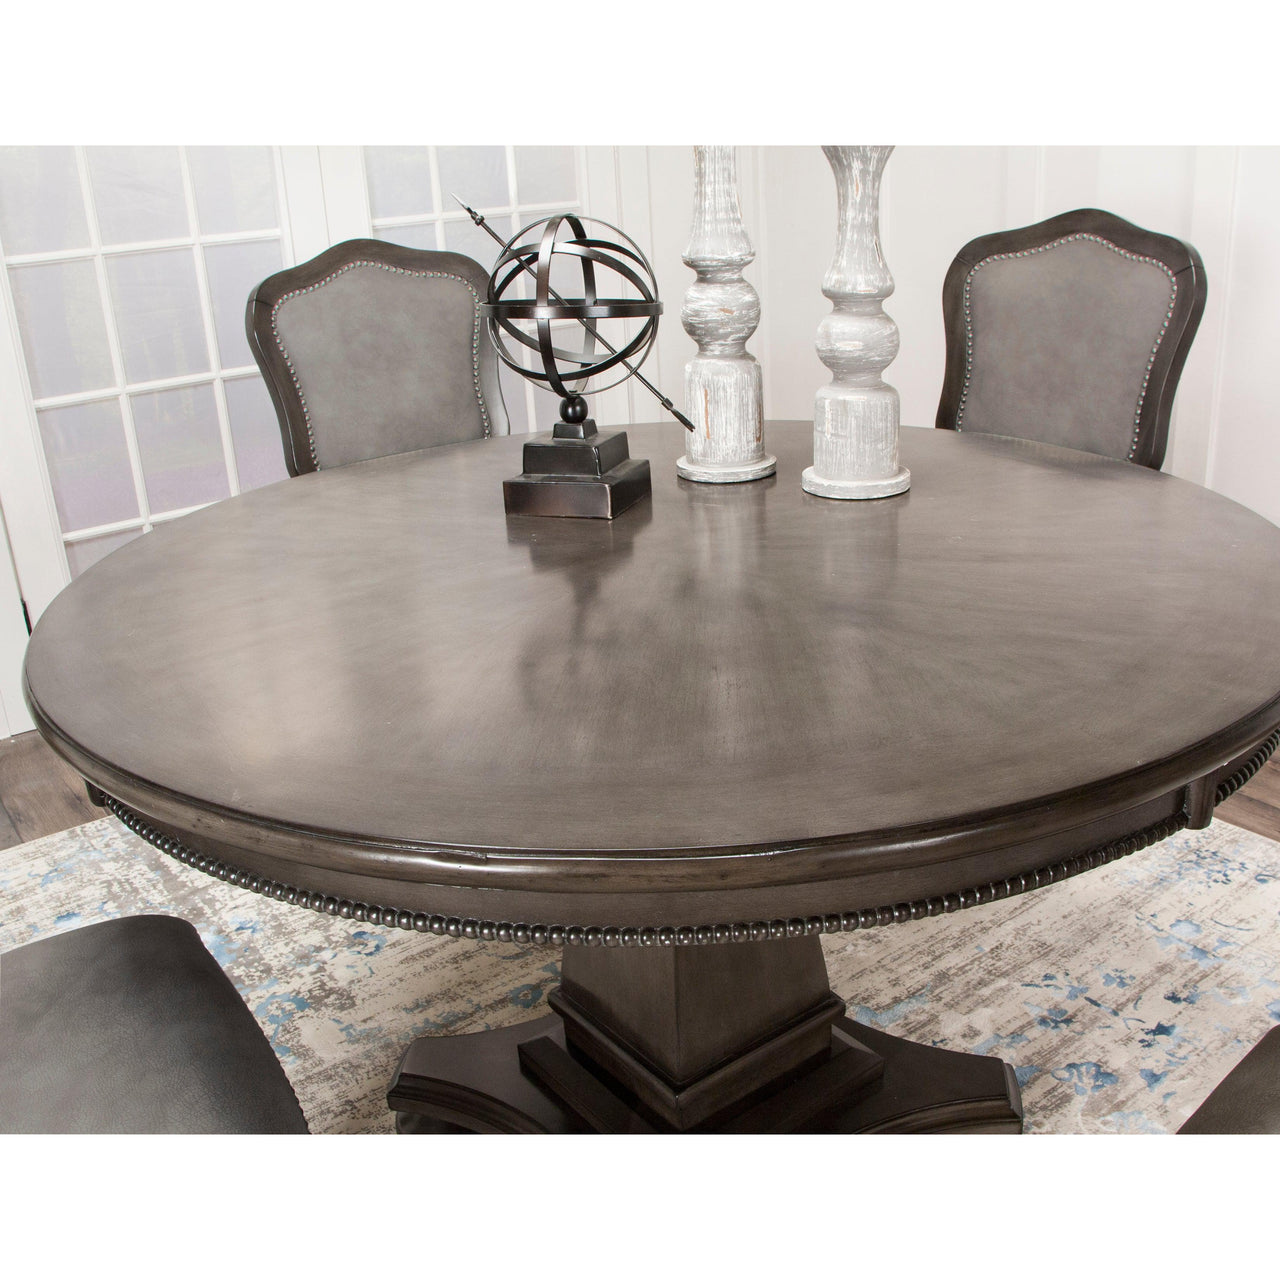 Convertible Poker & Dining Table Vegas by Sunset Trading-AMERICANA-POKER-TABLES